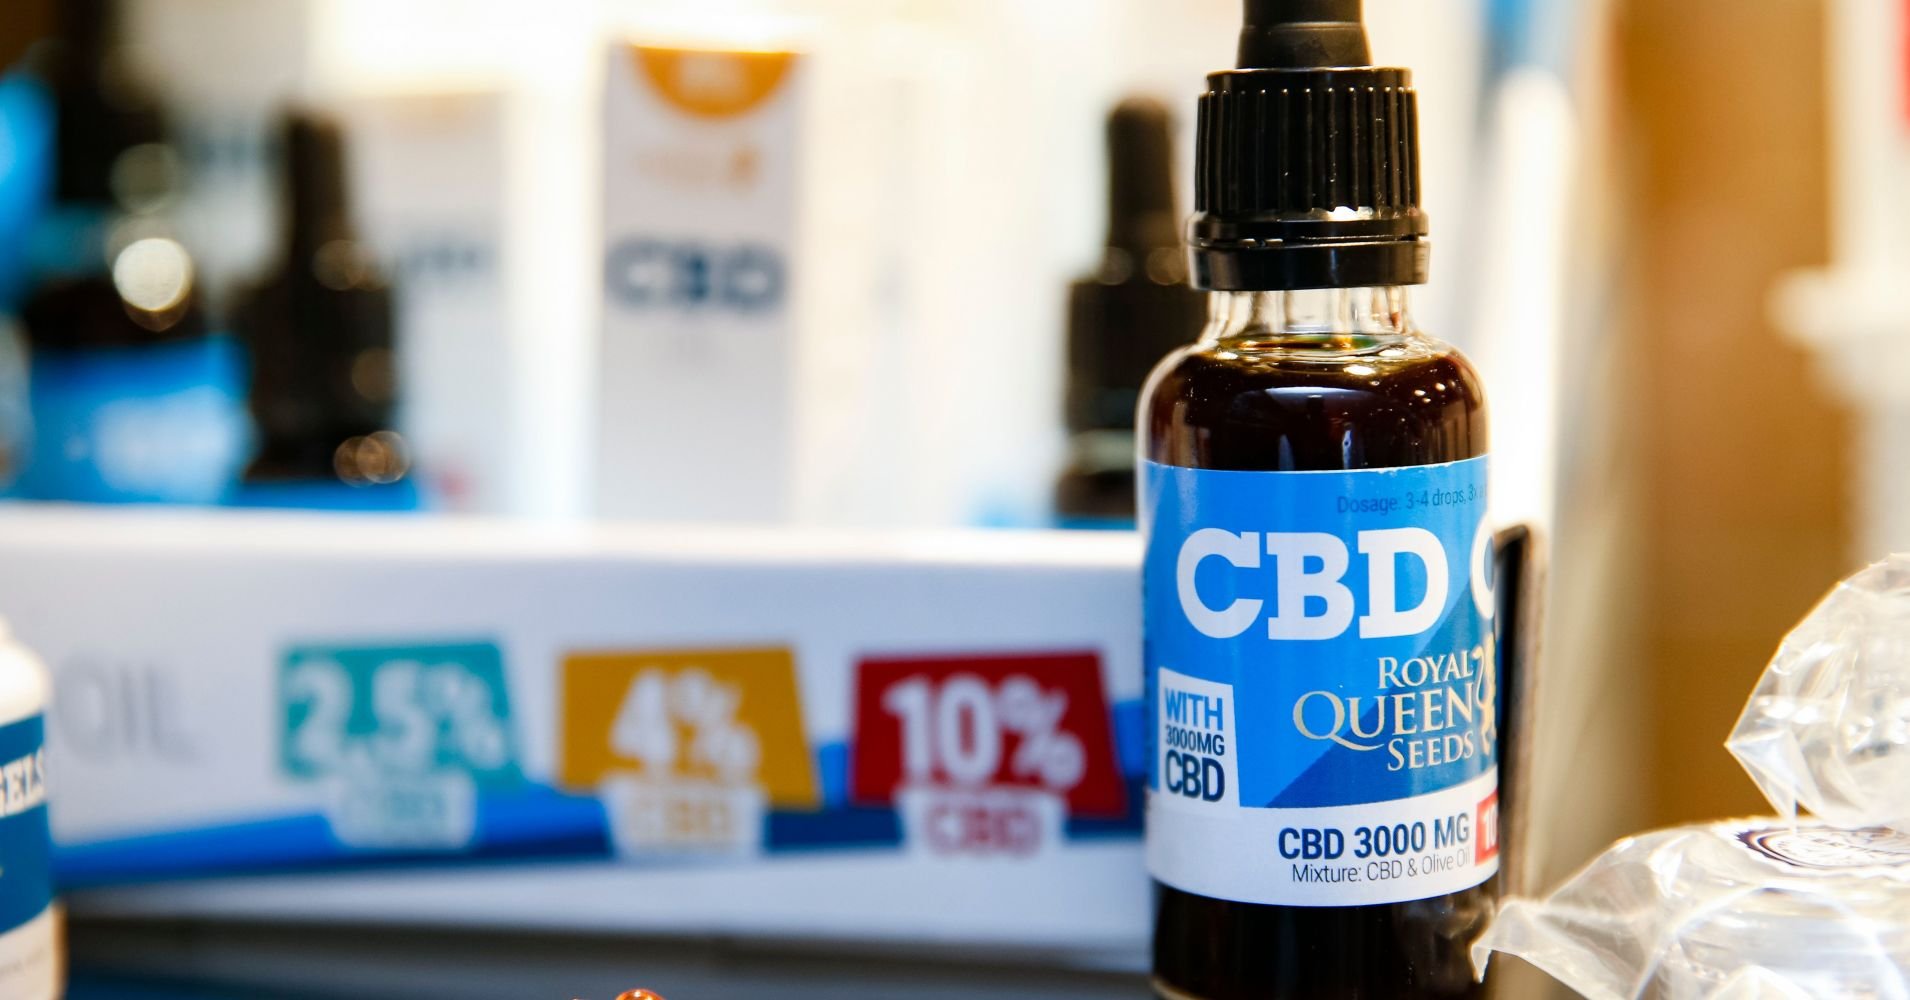 Why people love CBD — the cannabis product that won't get you high